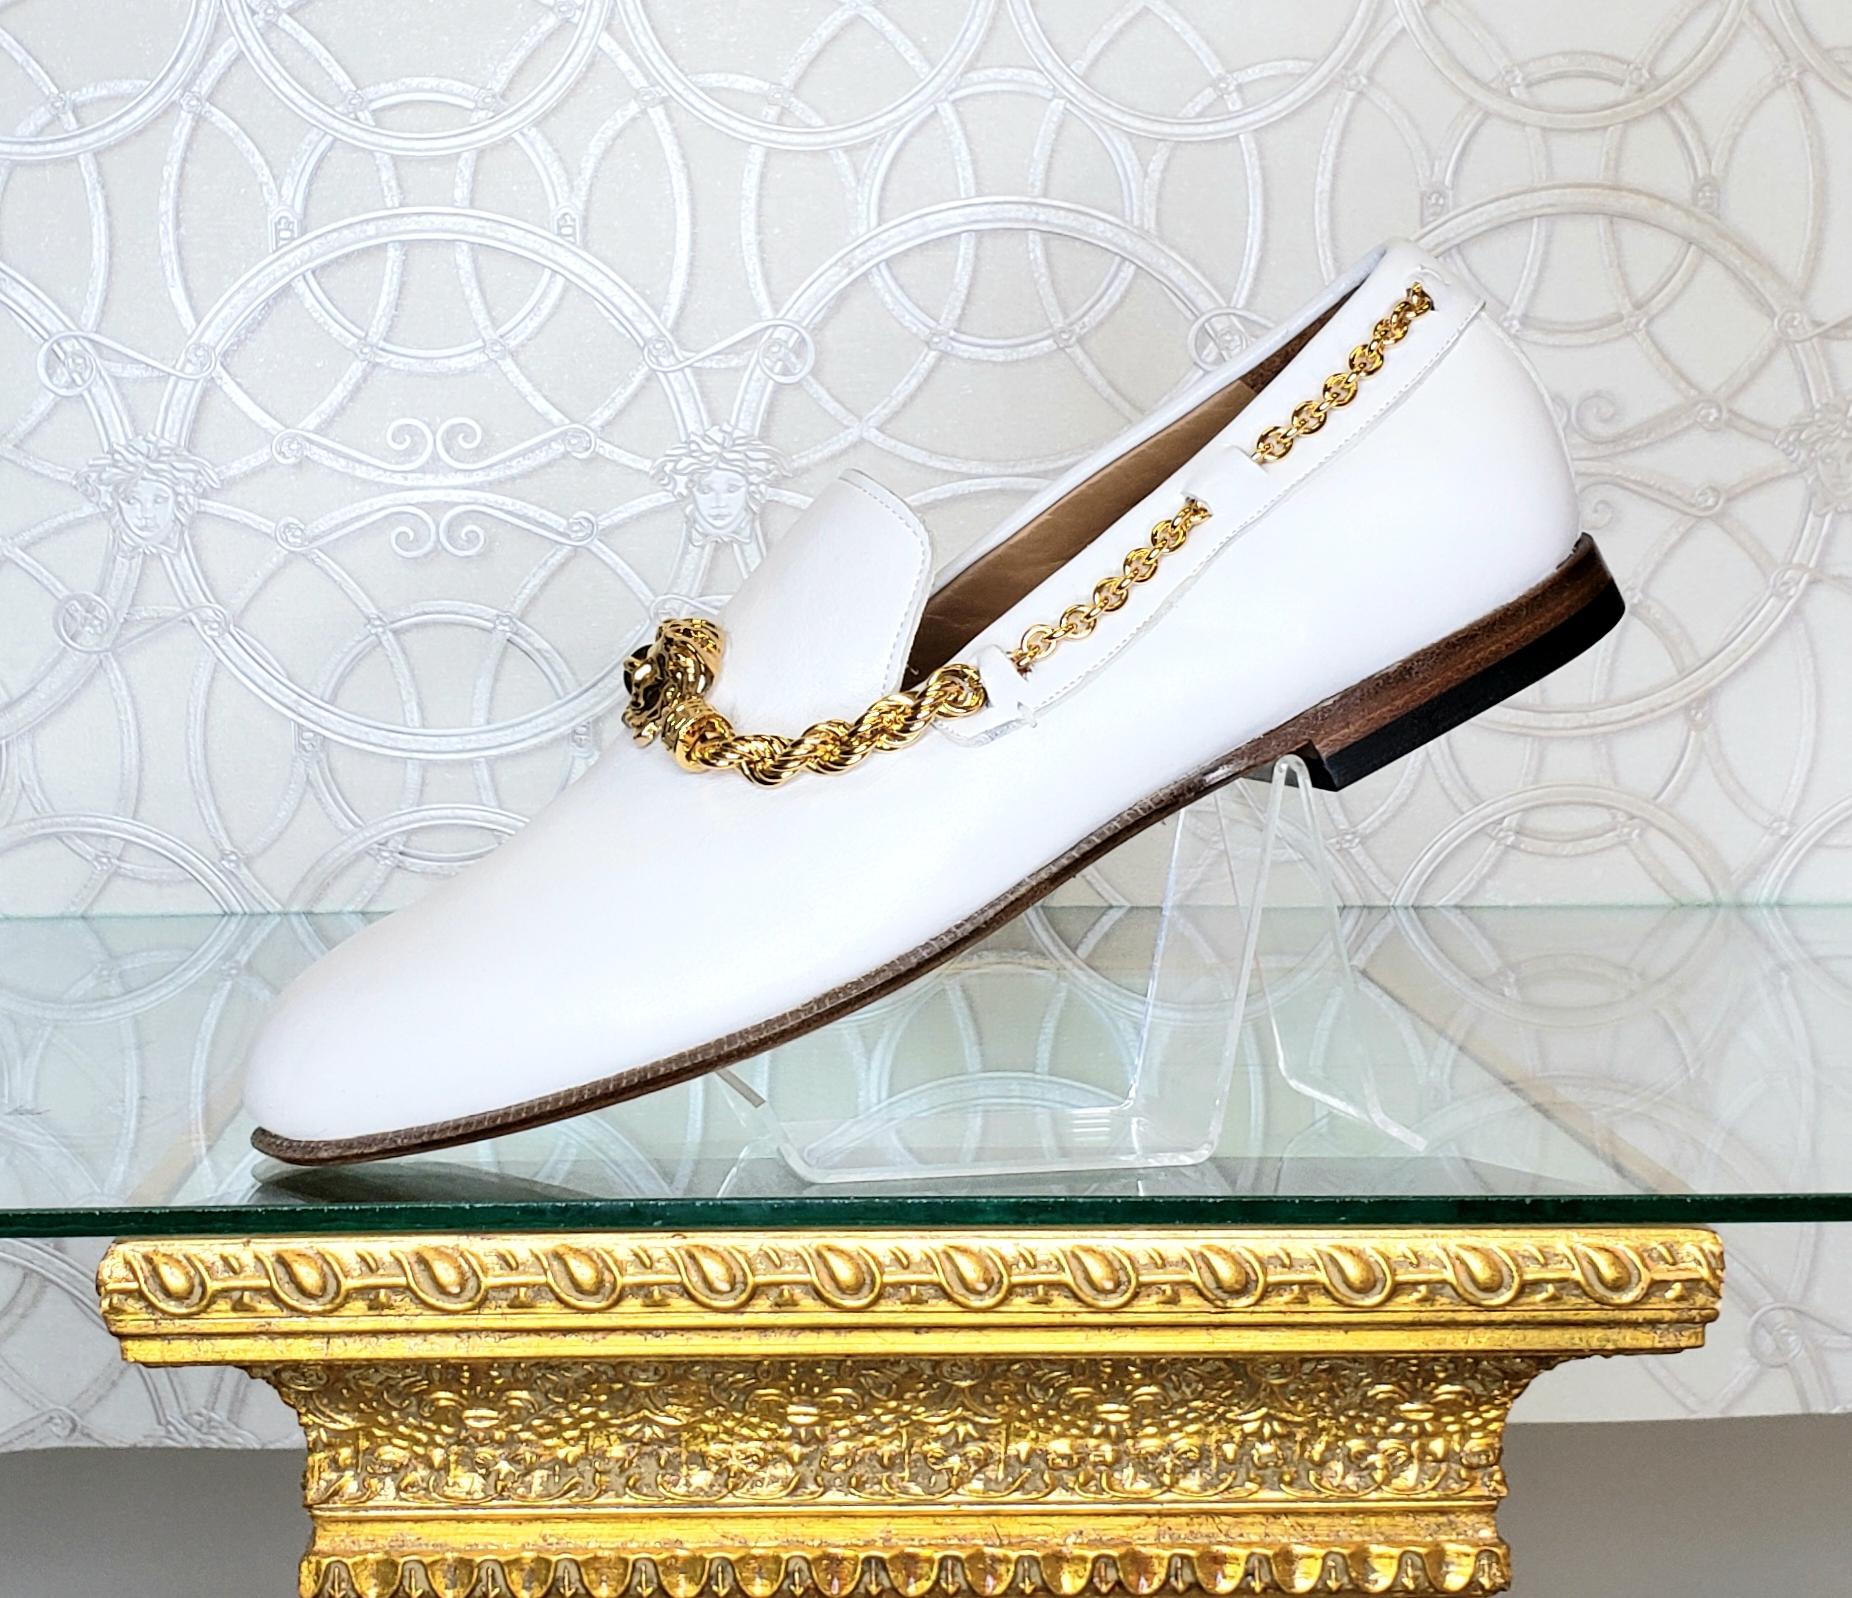 Men's VERSACE WHITE LEATHER LOAFER SHOES 44 - 11 and w/ 24K PLATED MEDUSA CHAIN SET